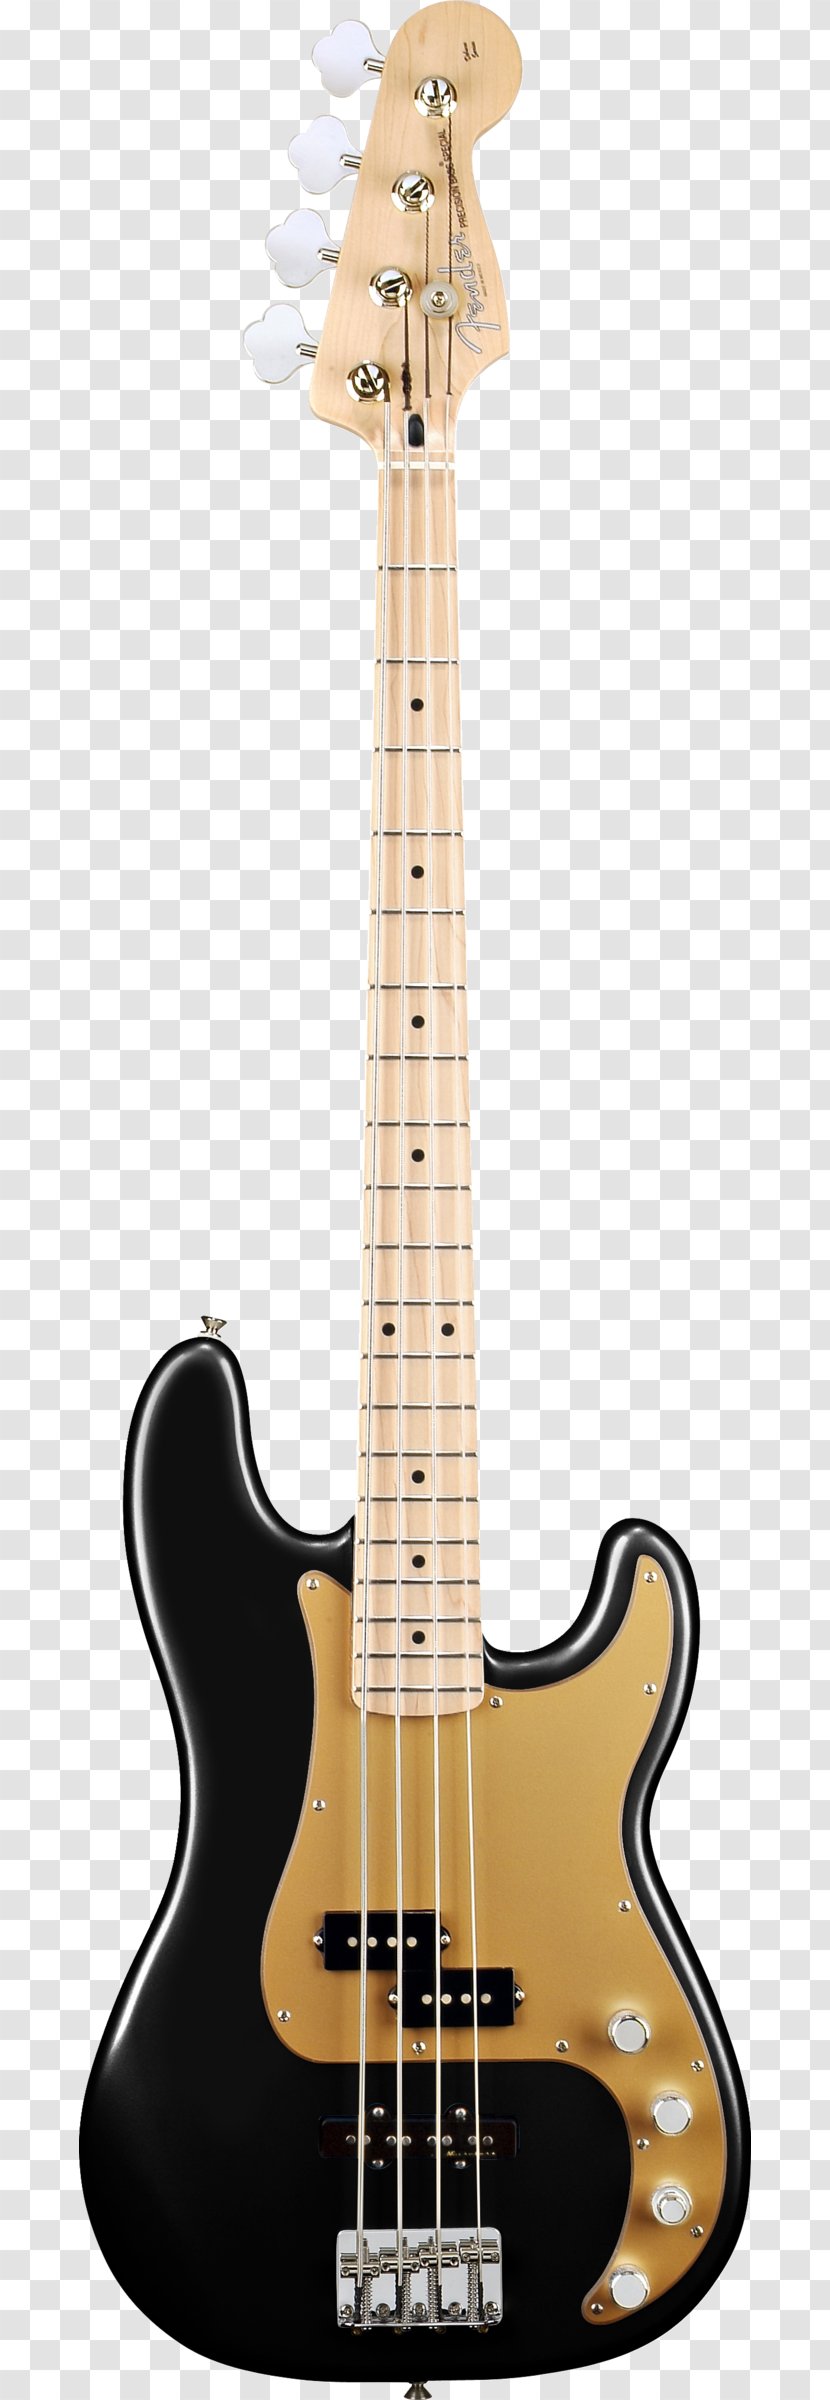 Fender Precision Bass Guitar Musical Instruments Corporation American Deluxe Series Fingerboard - Tree - Amplifier Transparent PNG